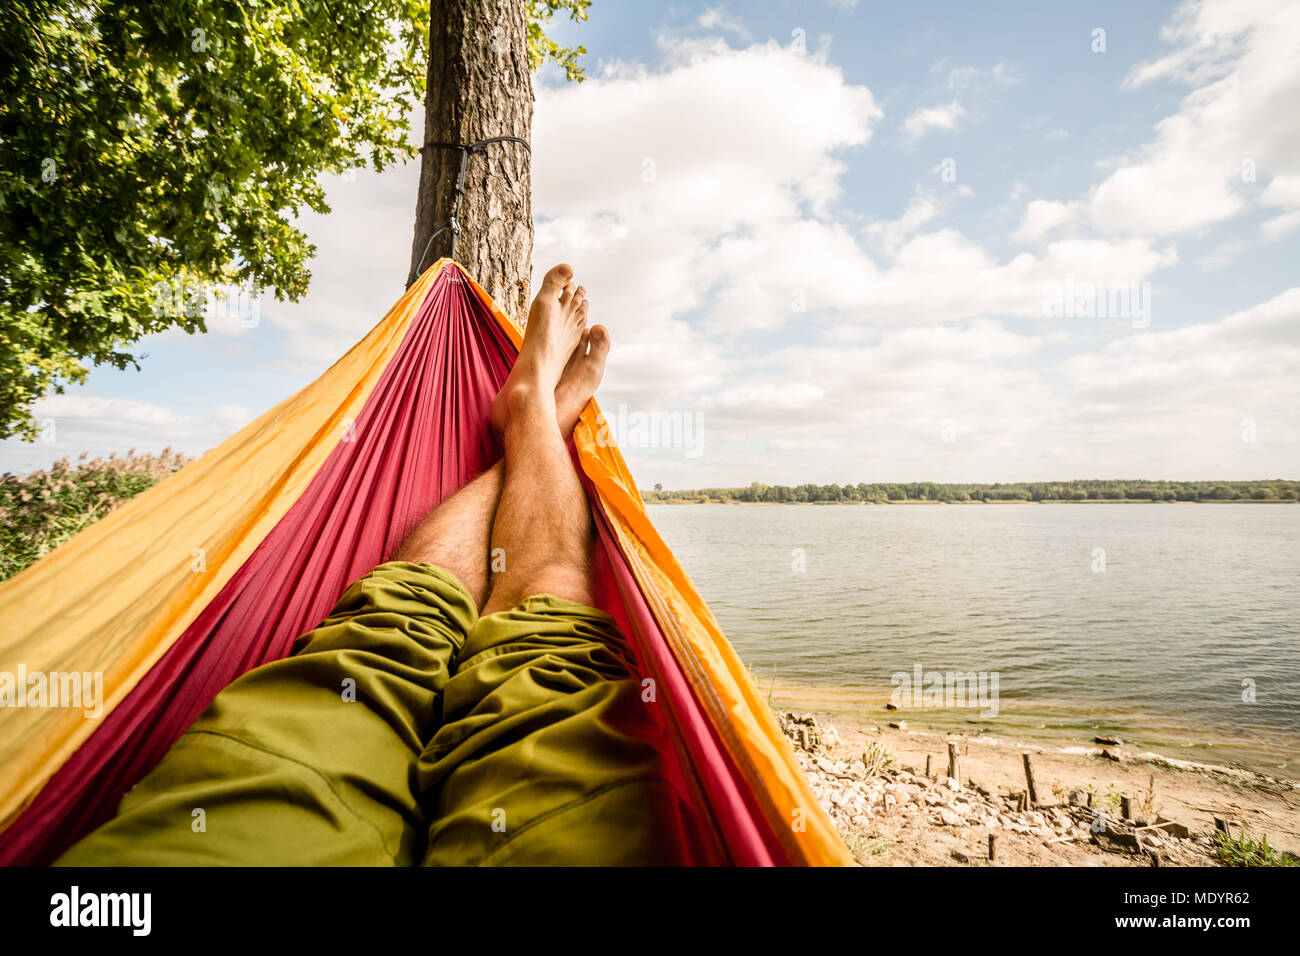 Relaxing in the hammock at the beach under a tree, summer day. Barefoot man laying in hammock, looking on a lake, inspiring landscape Stock Photo